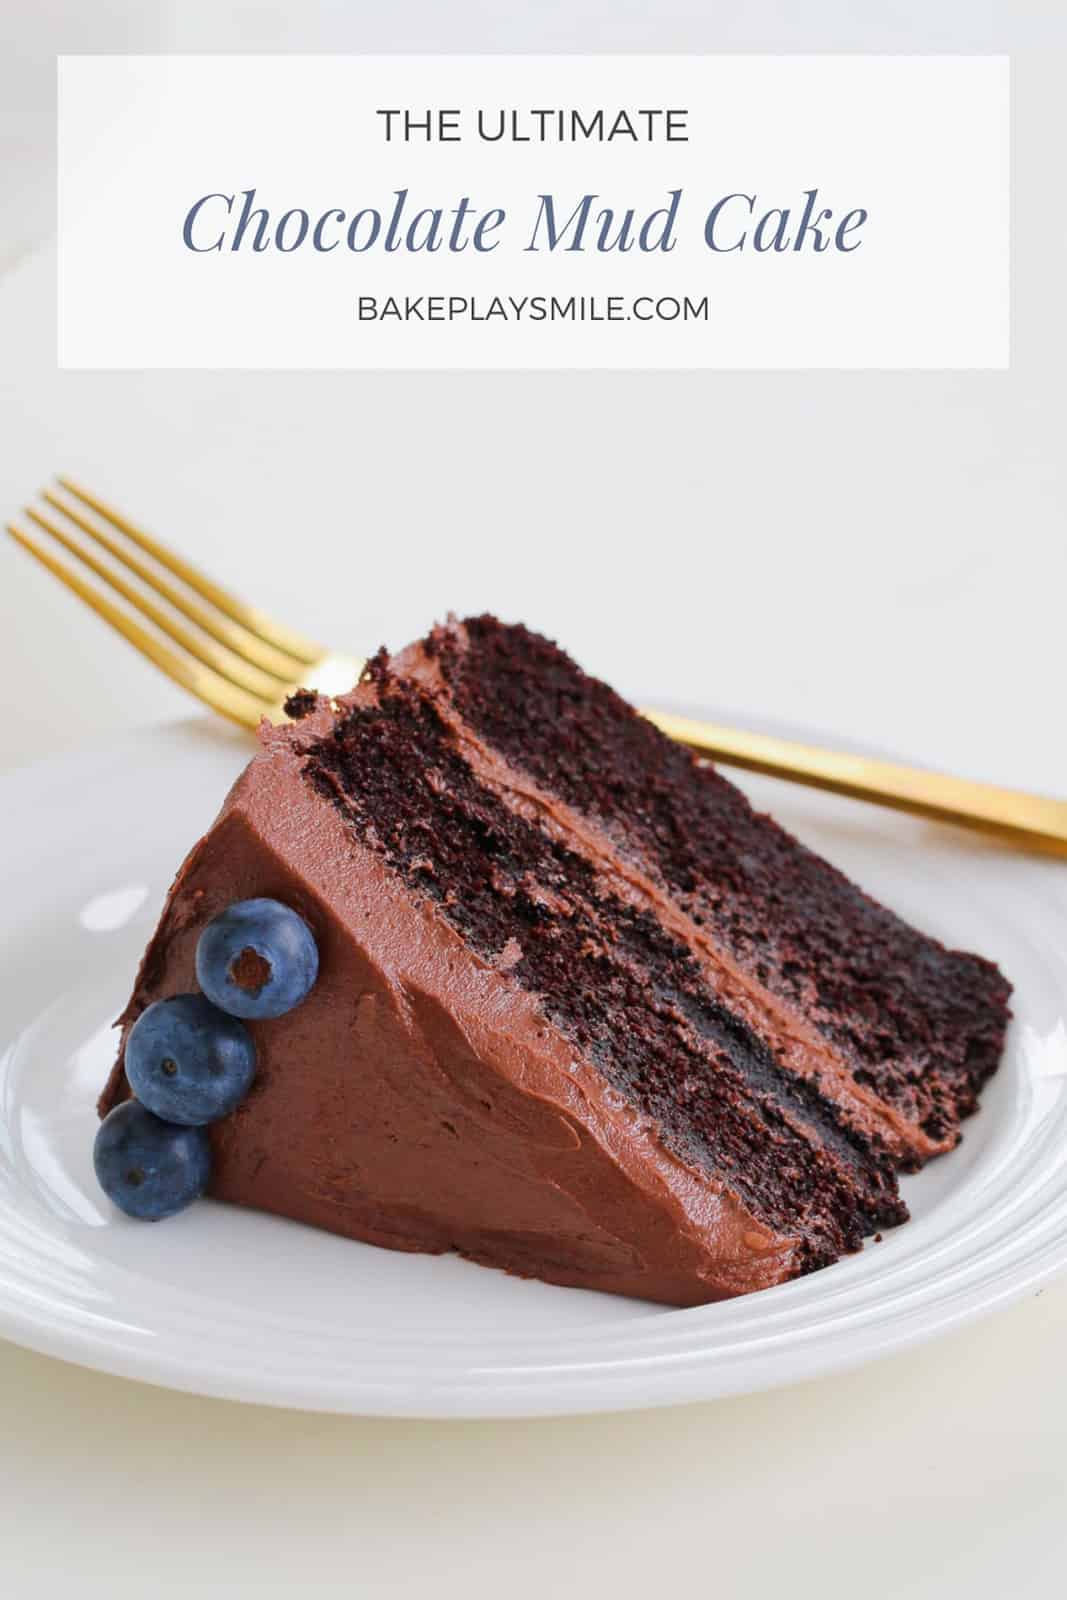 A slice of rich mud cake with chocolate frosting and blueberries on a white plate.